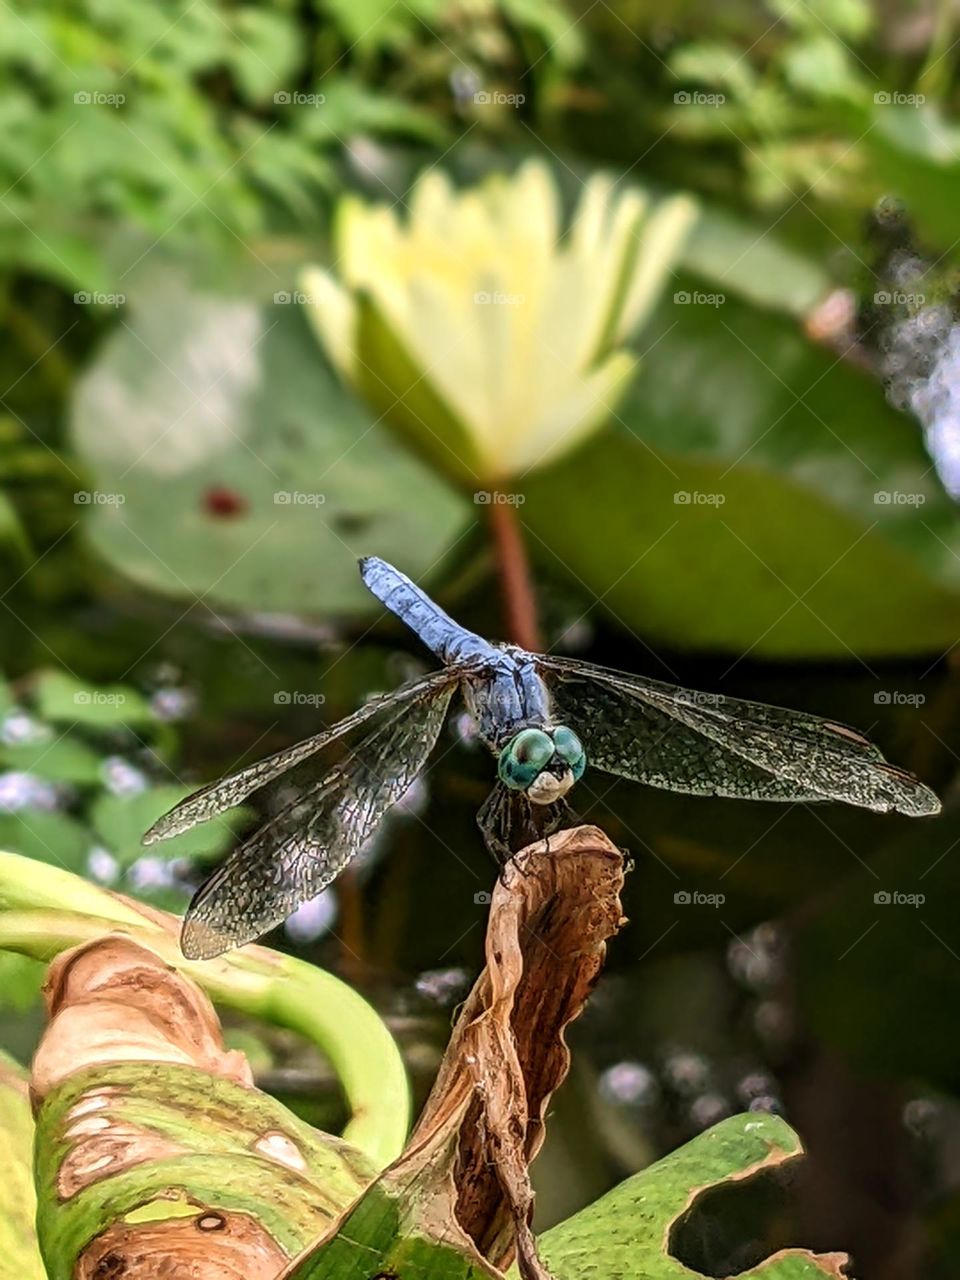 The Lotus and Dragonfly